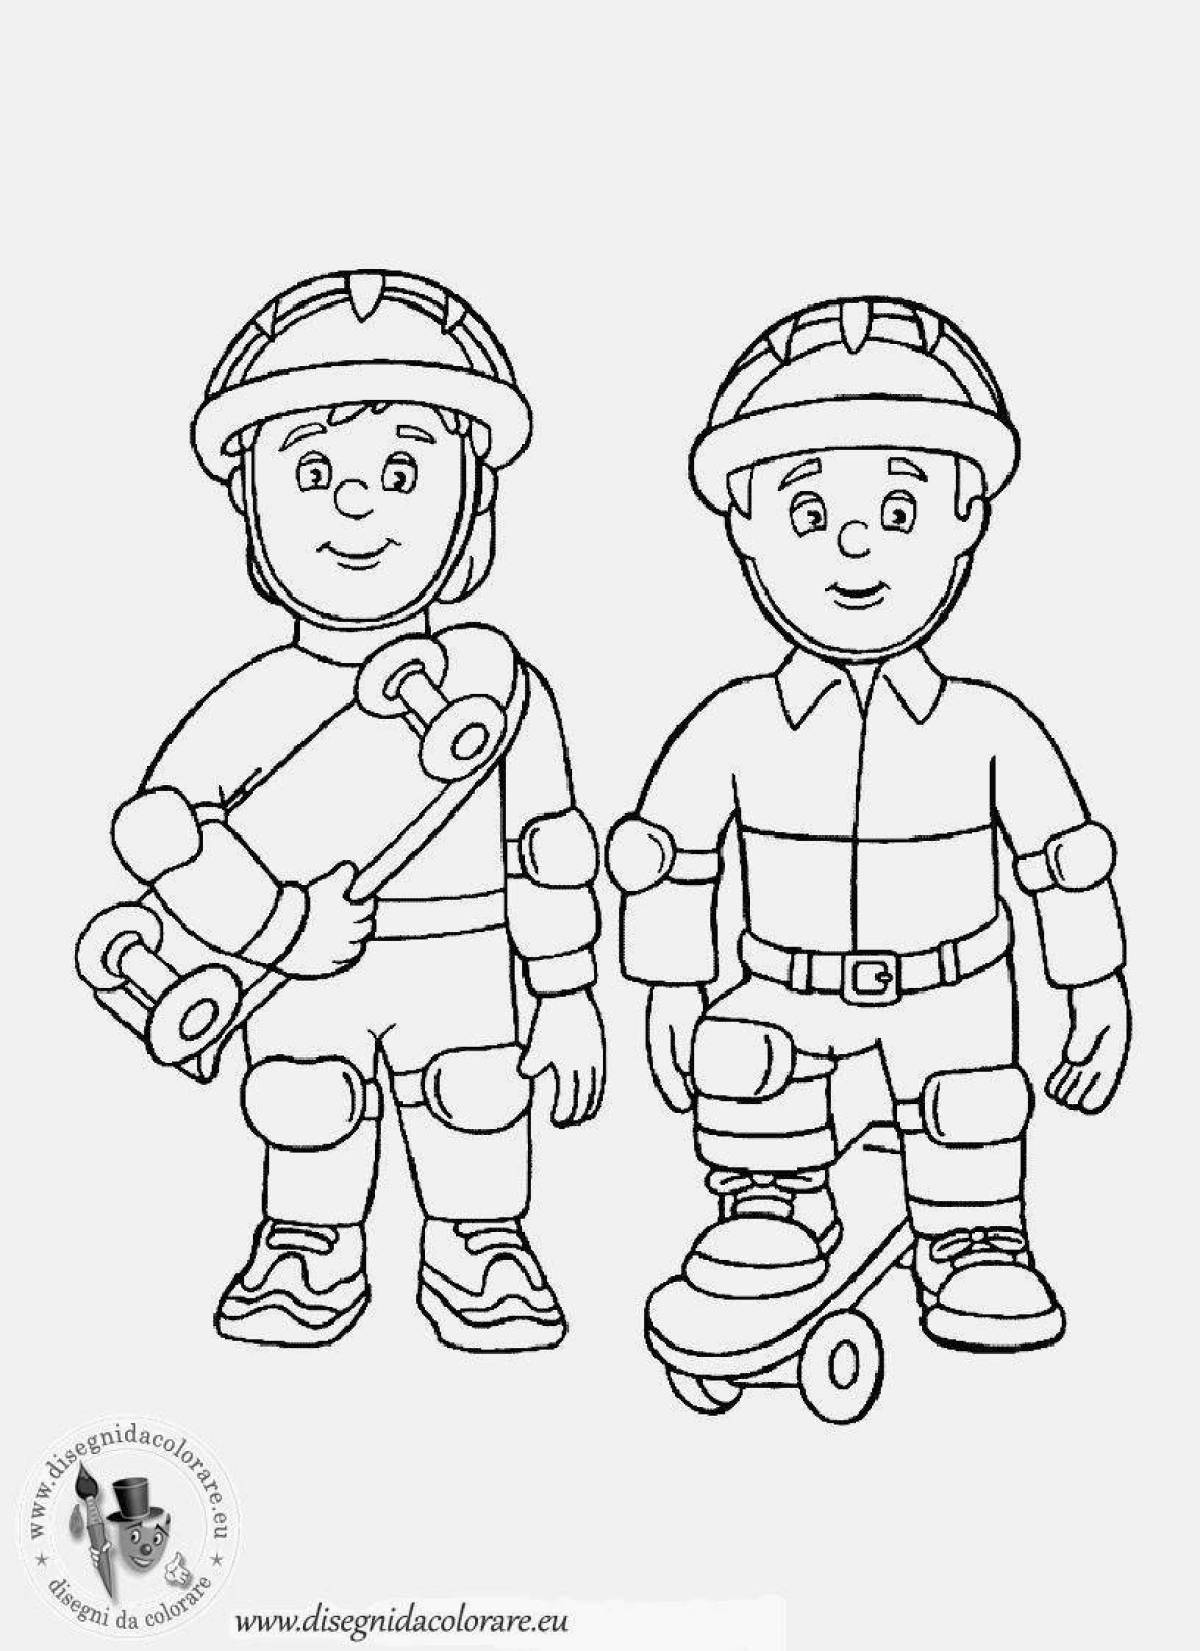 Courageous firefighter coloring page